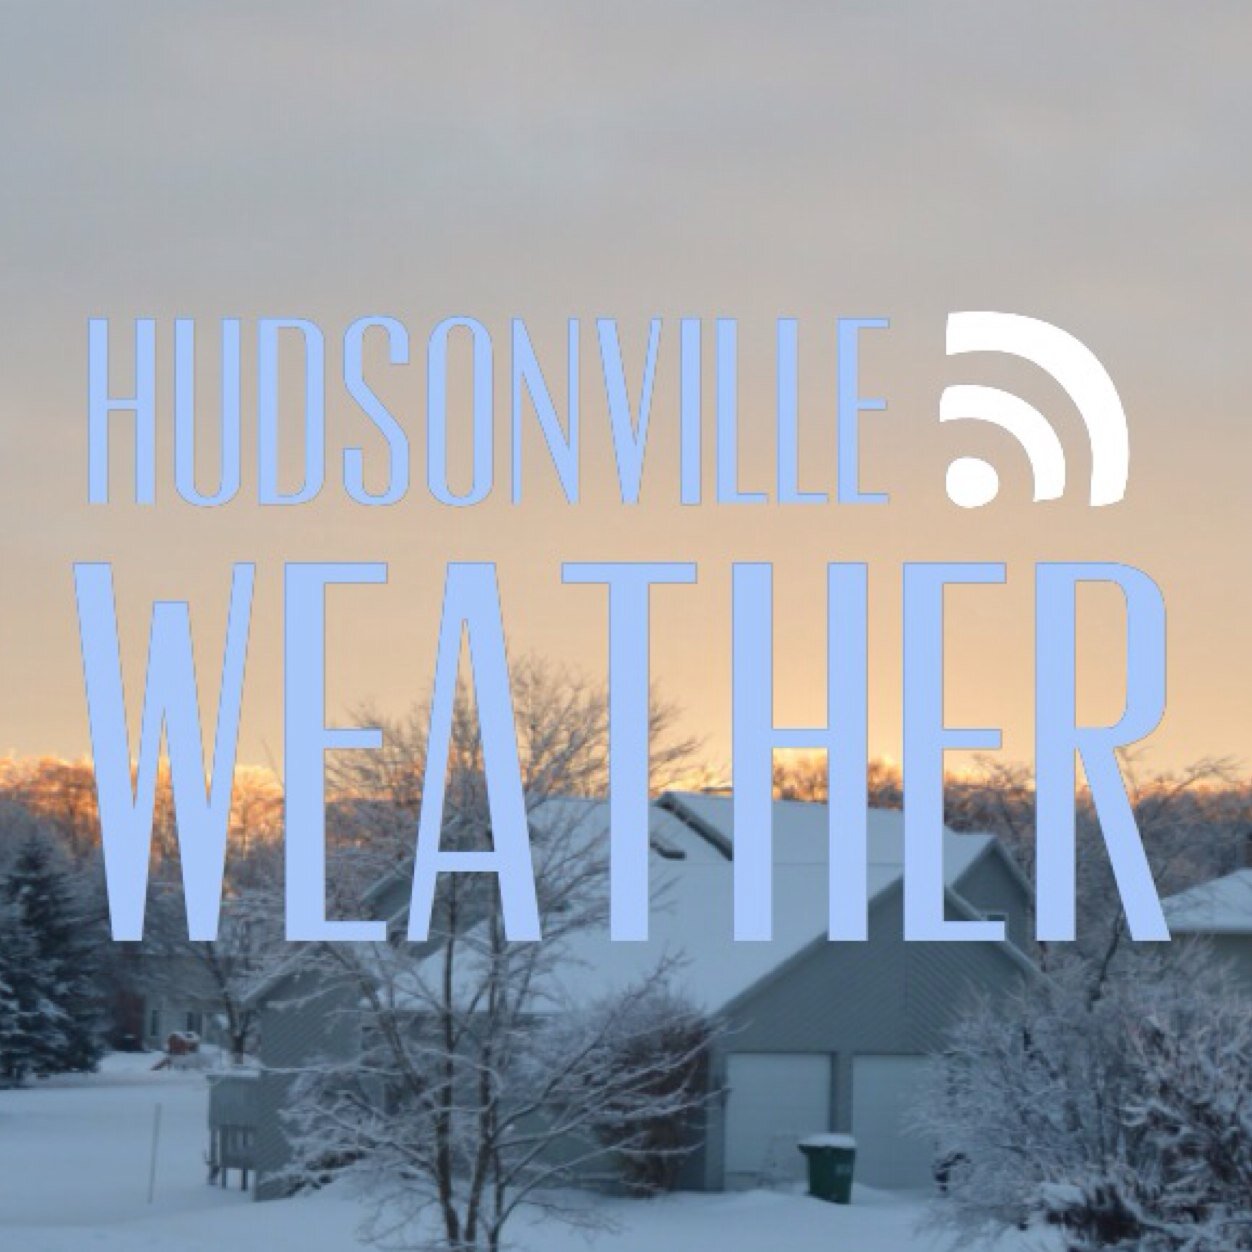 your weather source for hudsonville, michigan. run by @blake_harms. have photos or reports? use #hudsonvilleweather. email: hudsonvilleweather@gmail.com